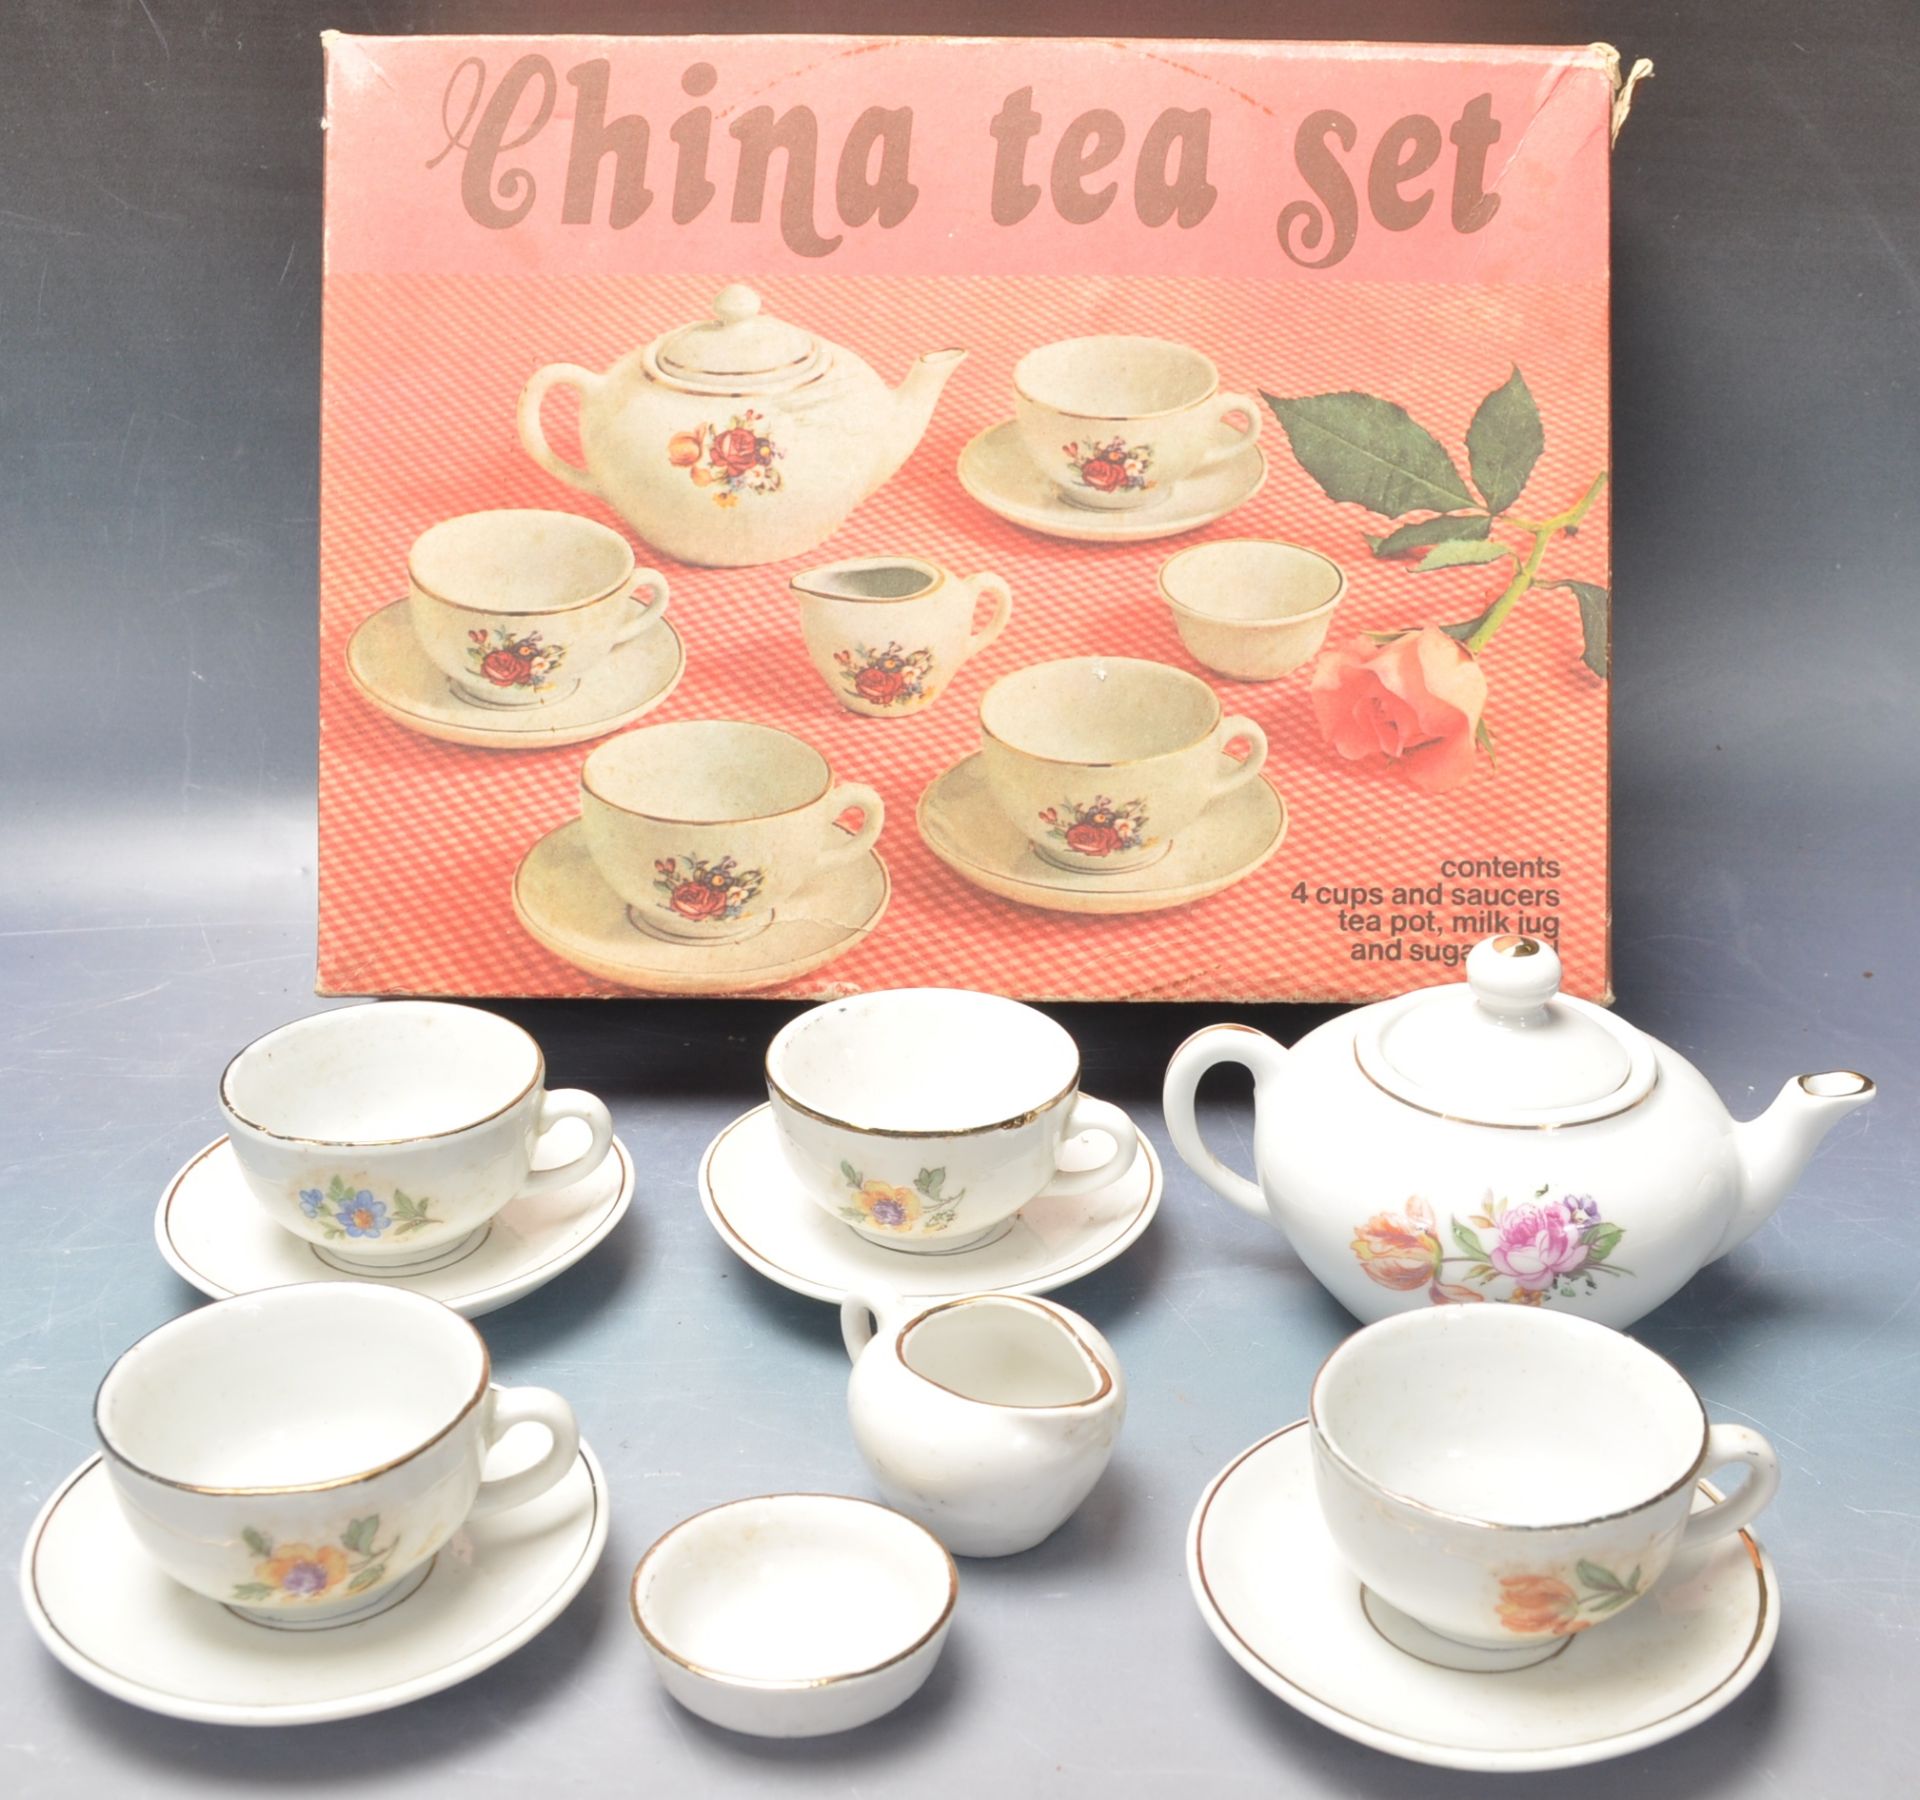 COLLECTION OF VINTAGE TEA CUPS AND SAUCERS. - Image 7 of 10